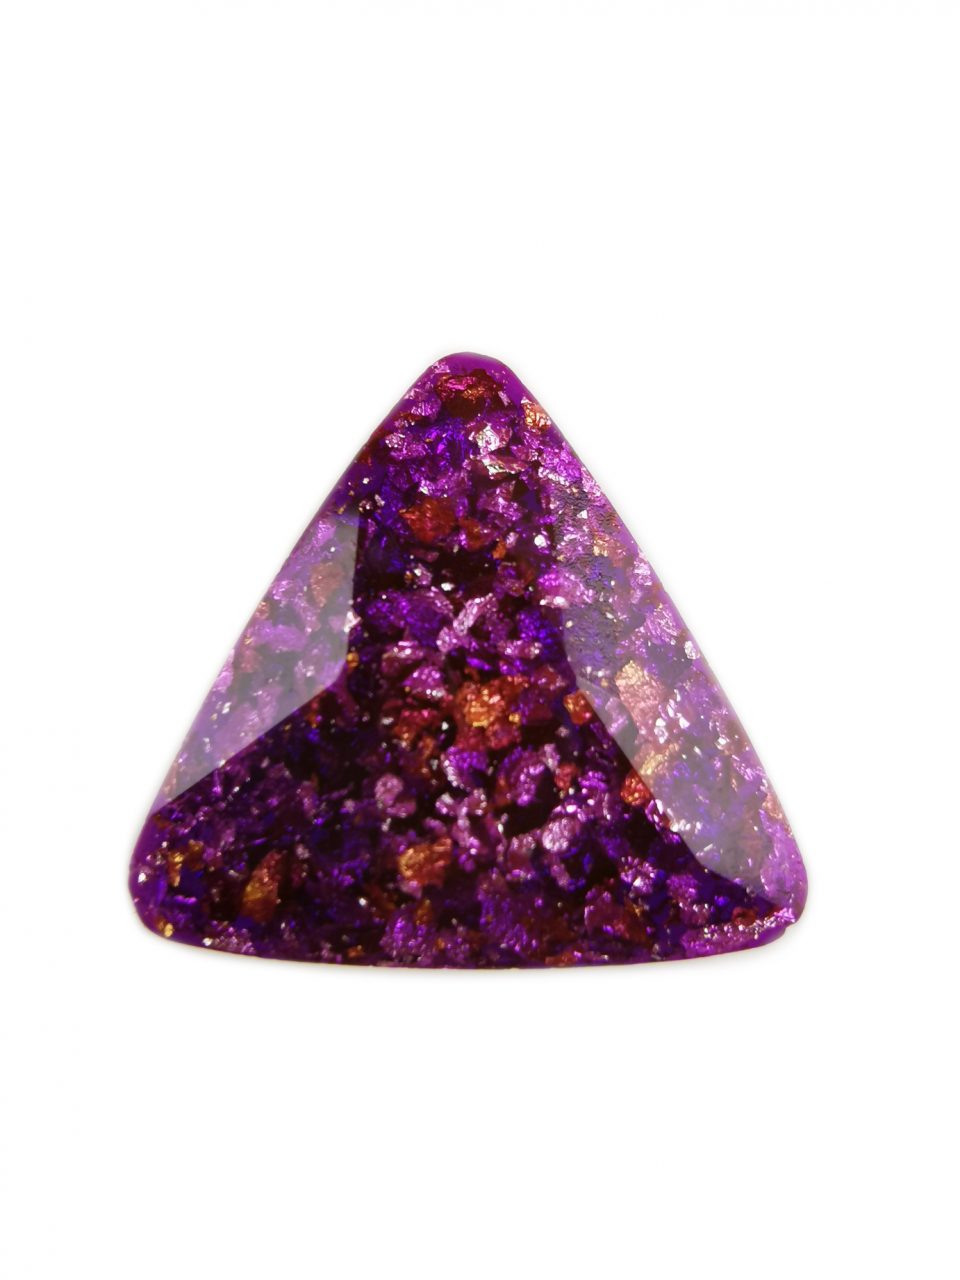 Violet Triangle Orgone Shield by OrgoneVibes